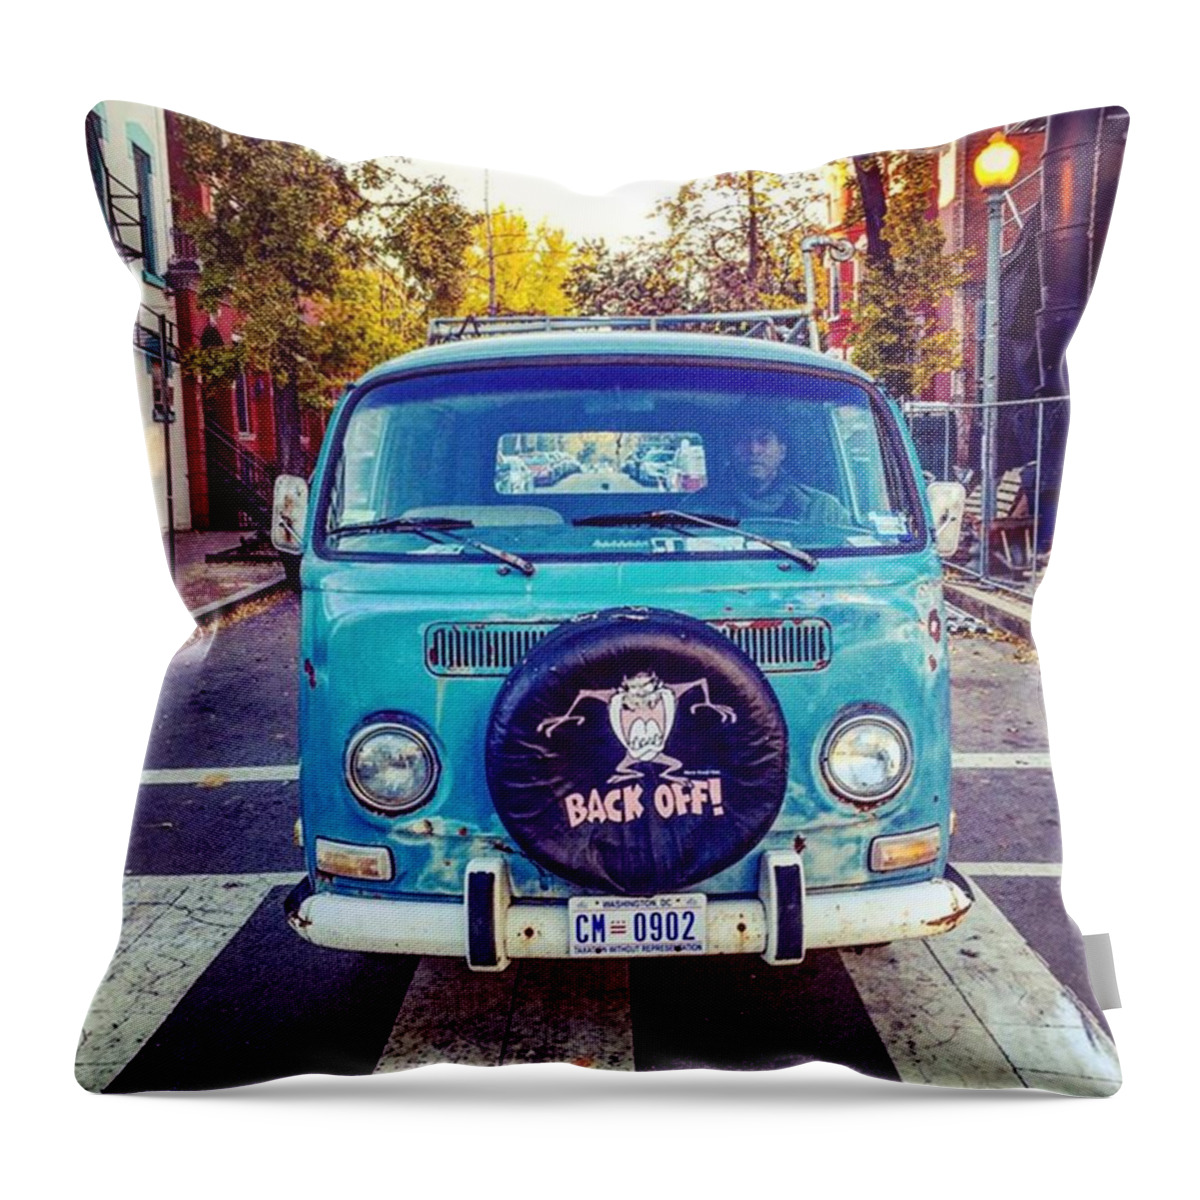 Blue Throw Pillow featuring the photograph You Don't Want To Mess With This by Sandy Major Photography